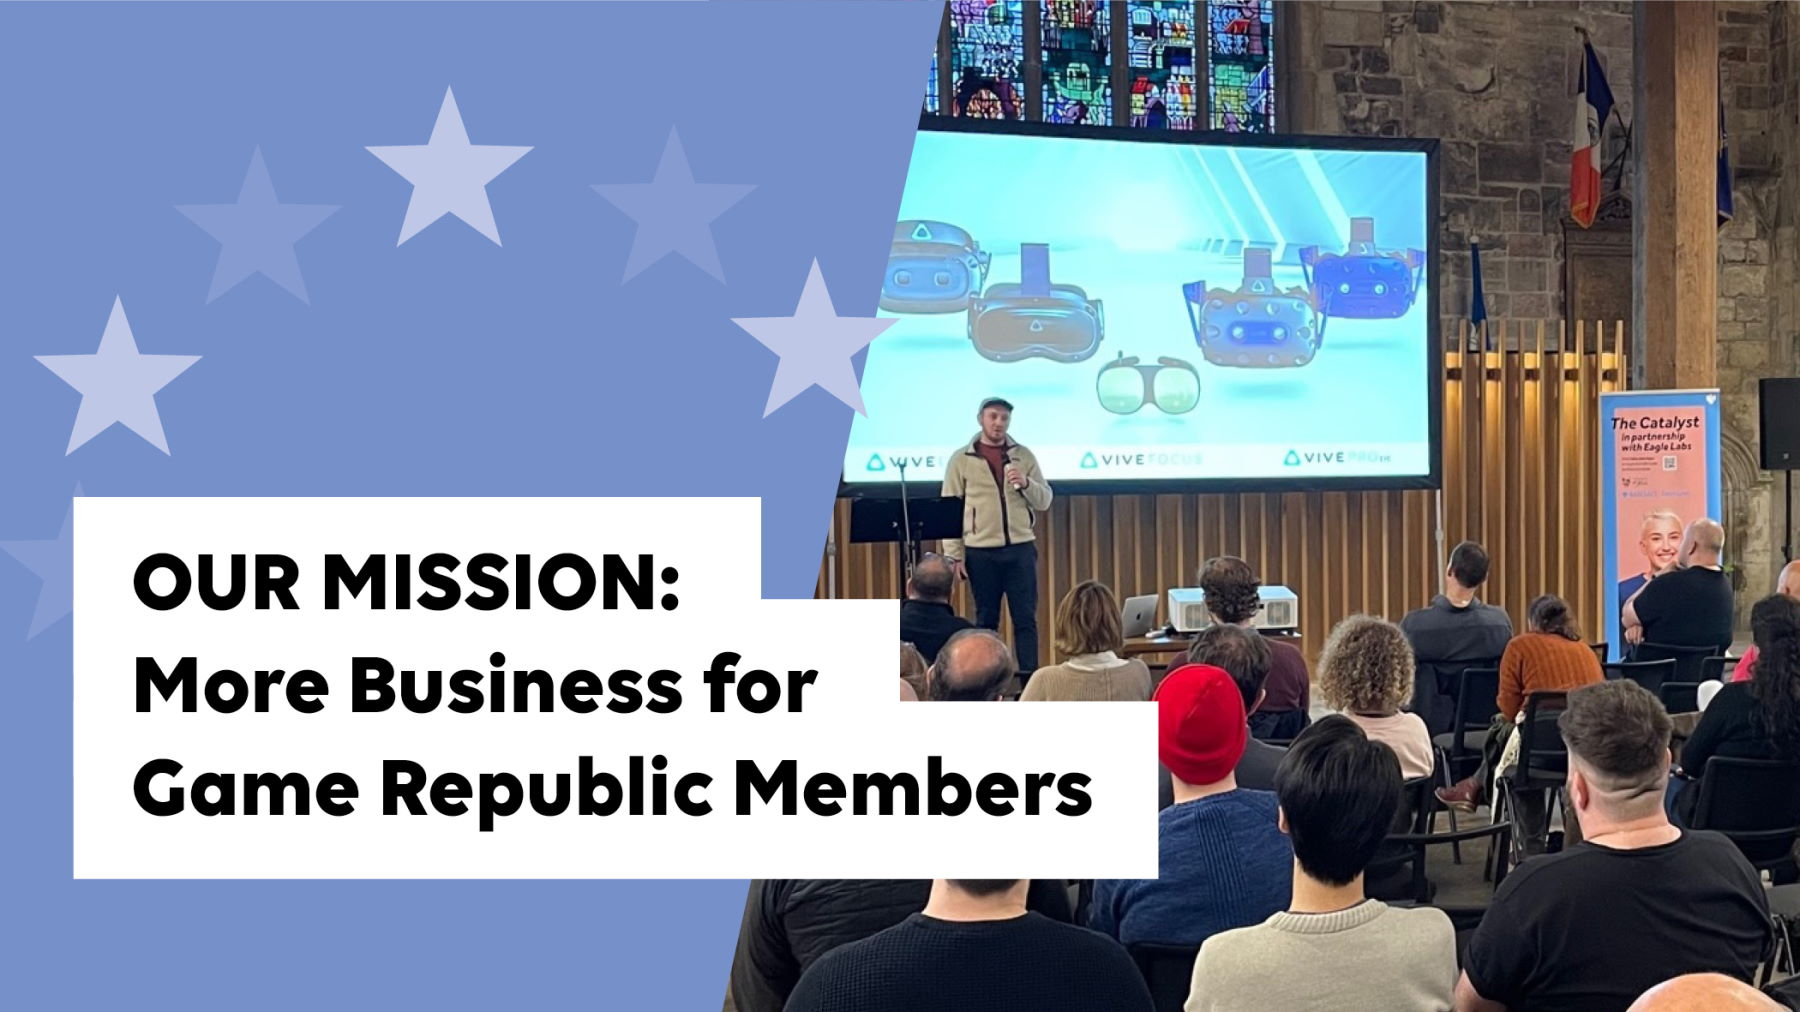 Our Mission - more business for Game Republic members